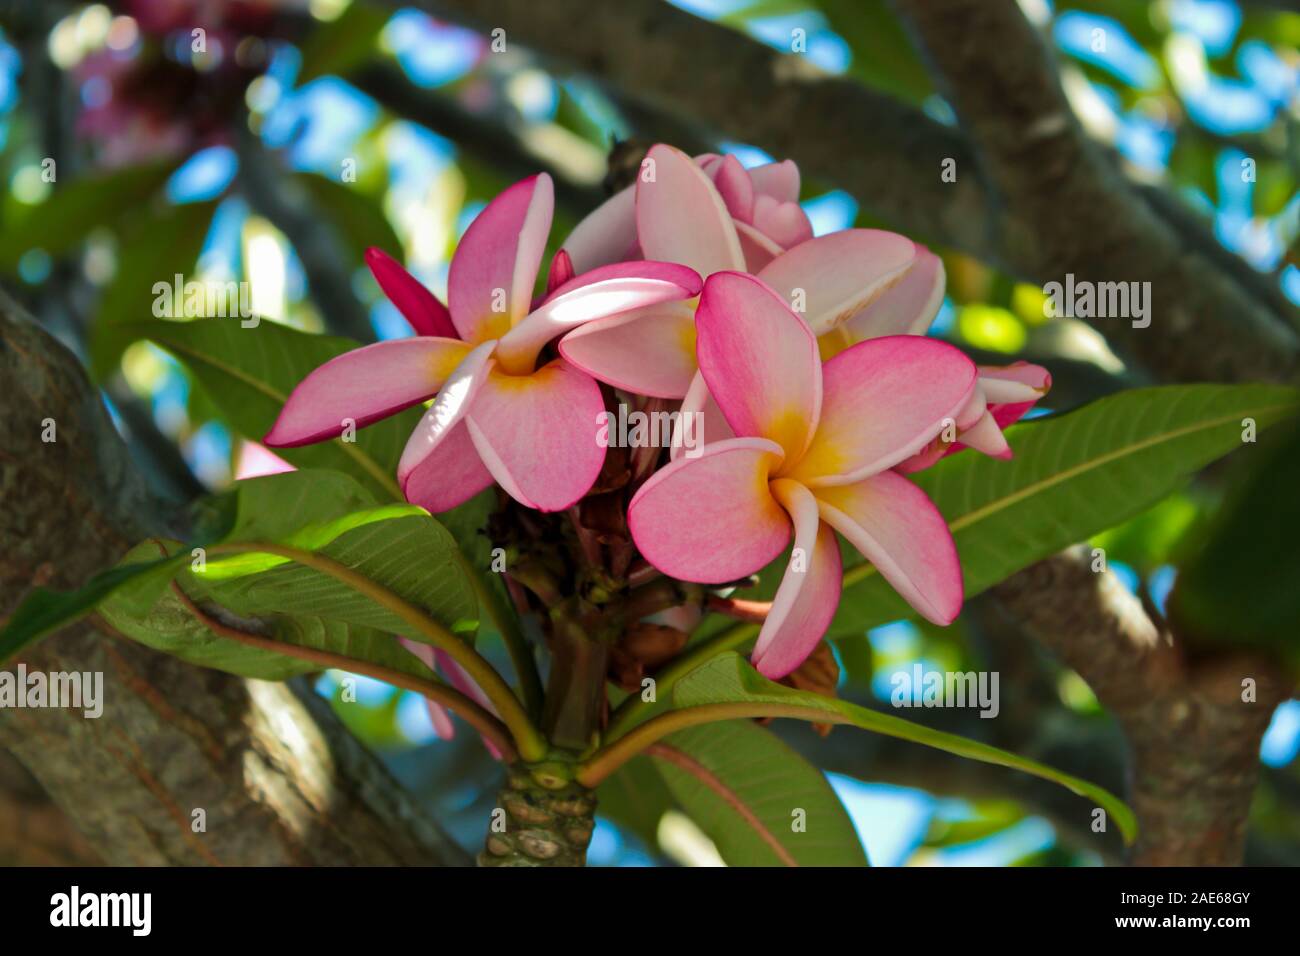 Plumeria with pink and yellow flowers from Cape Town in South Africa. Stock Photo